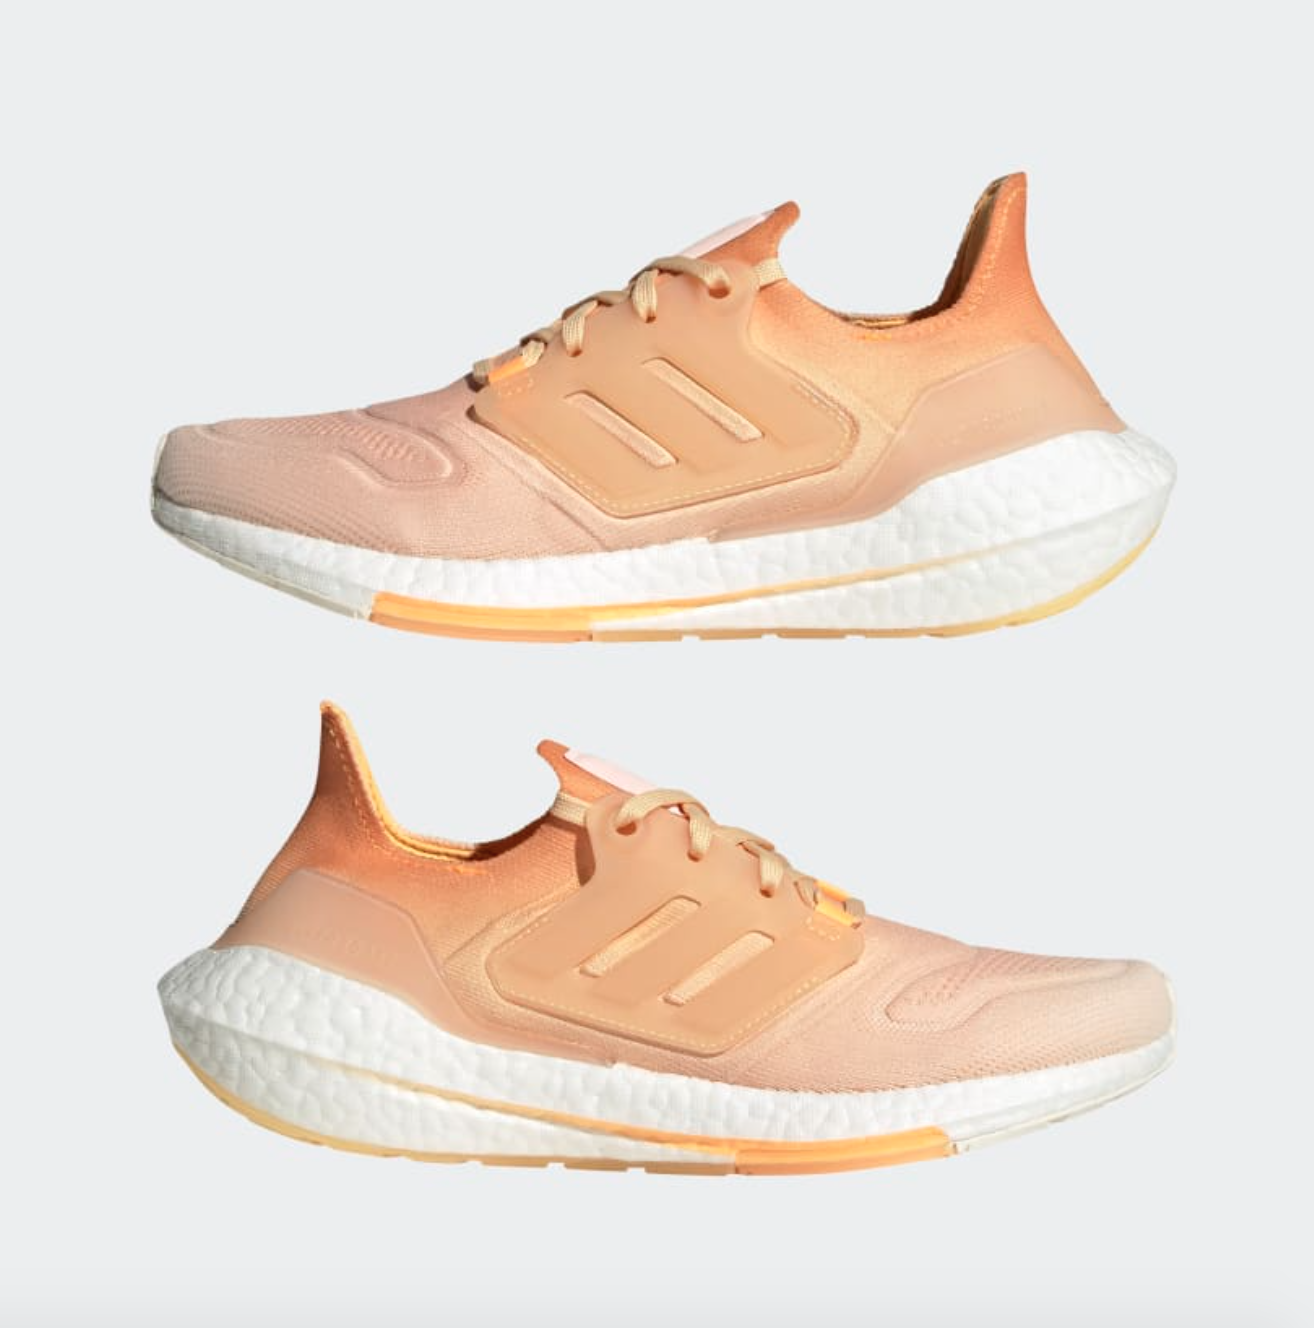 the Adidas Ultraboost 22 sneakers in a peach color